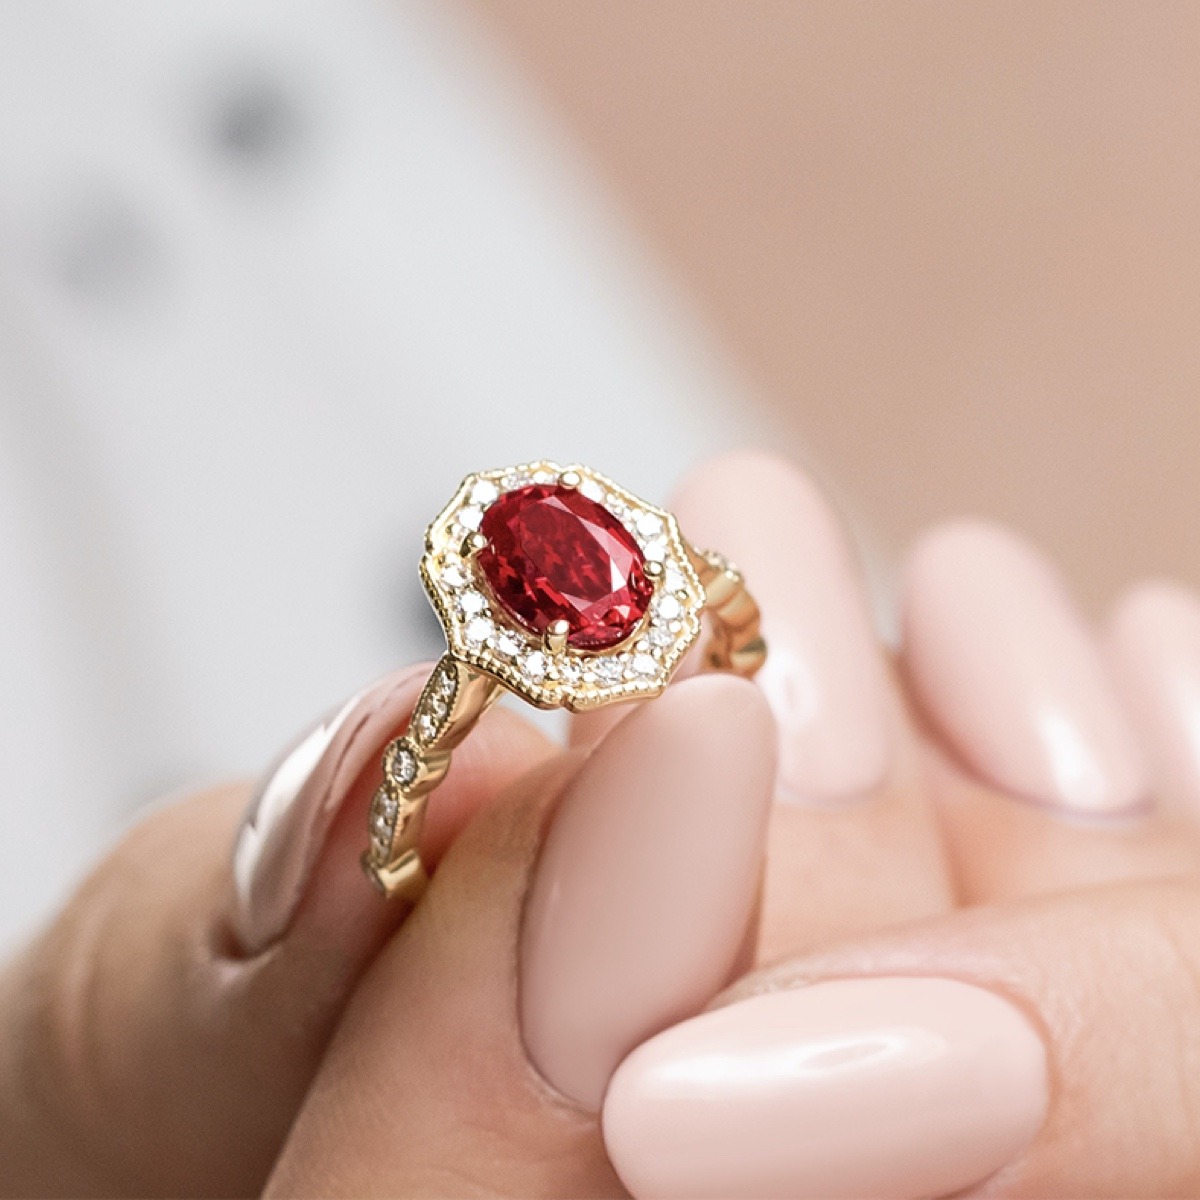 Antique style engagement ring with detailed filigree and a diamond halo surrounding a 2ct oval ruby in yellow gold